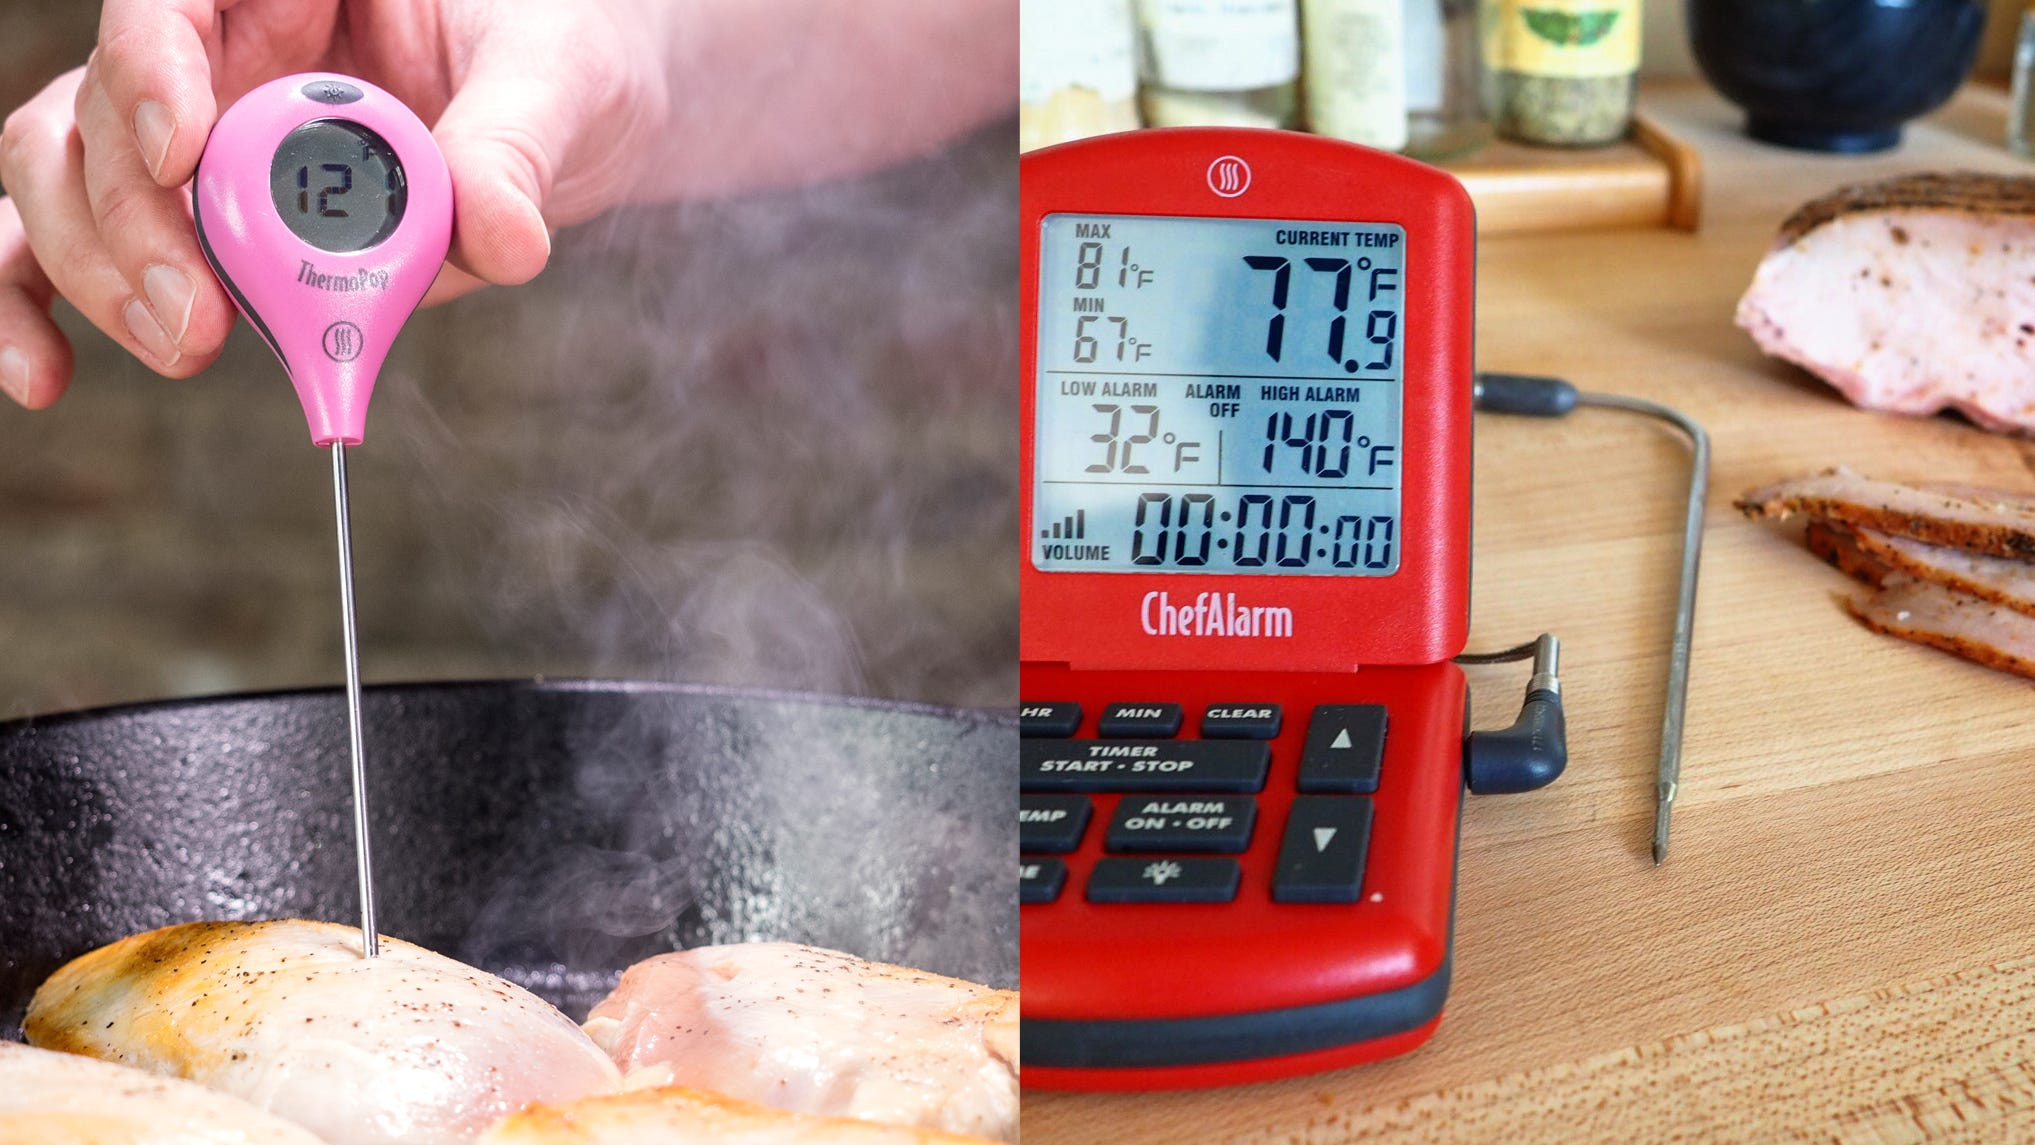 Thermoworks is having a huge sale on meat thermometers right now